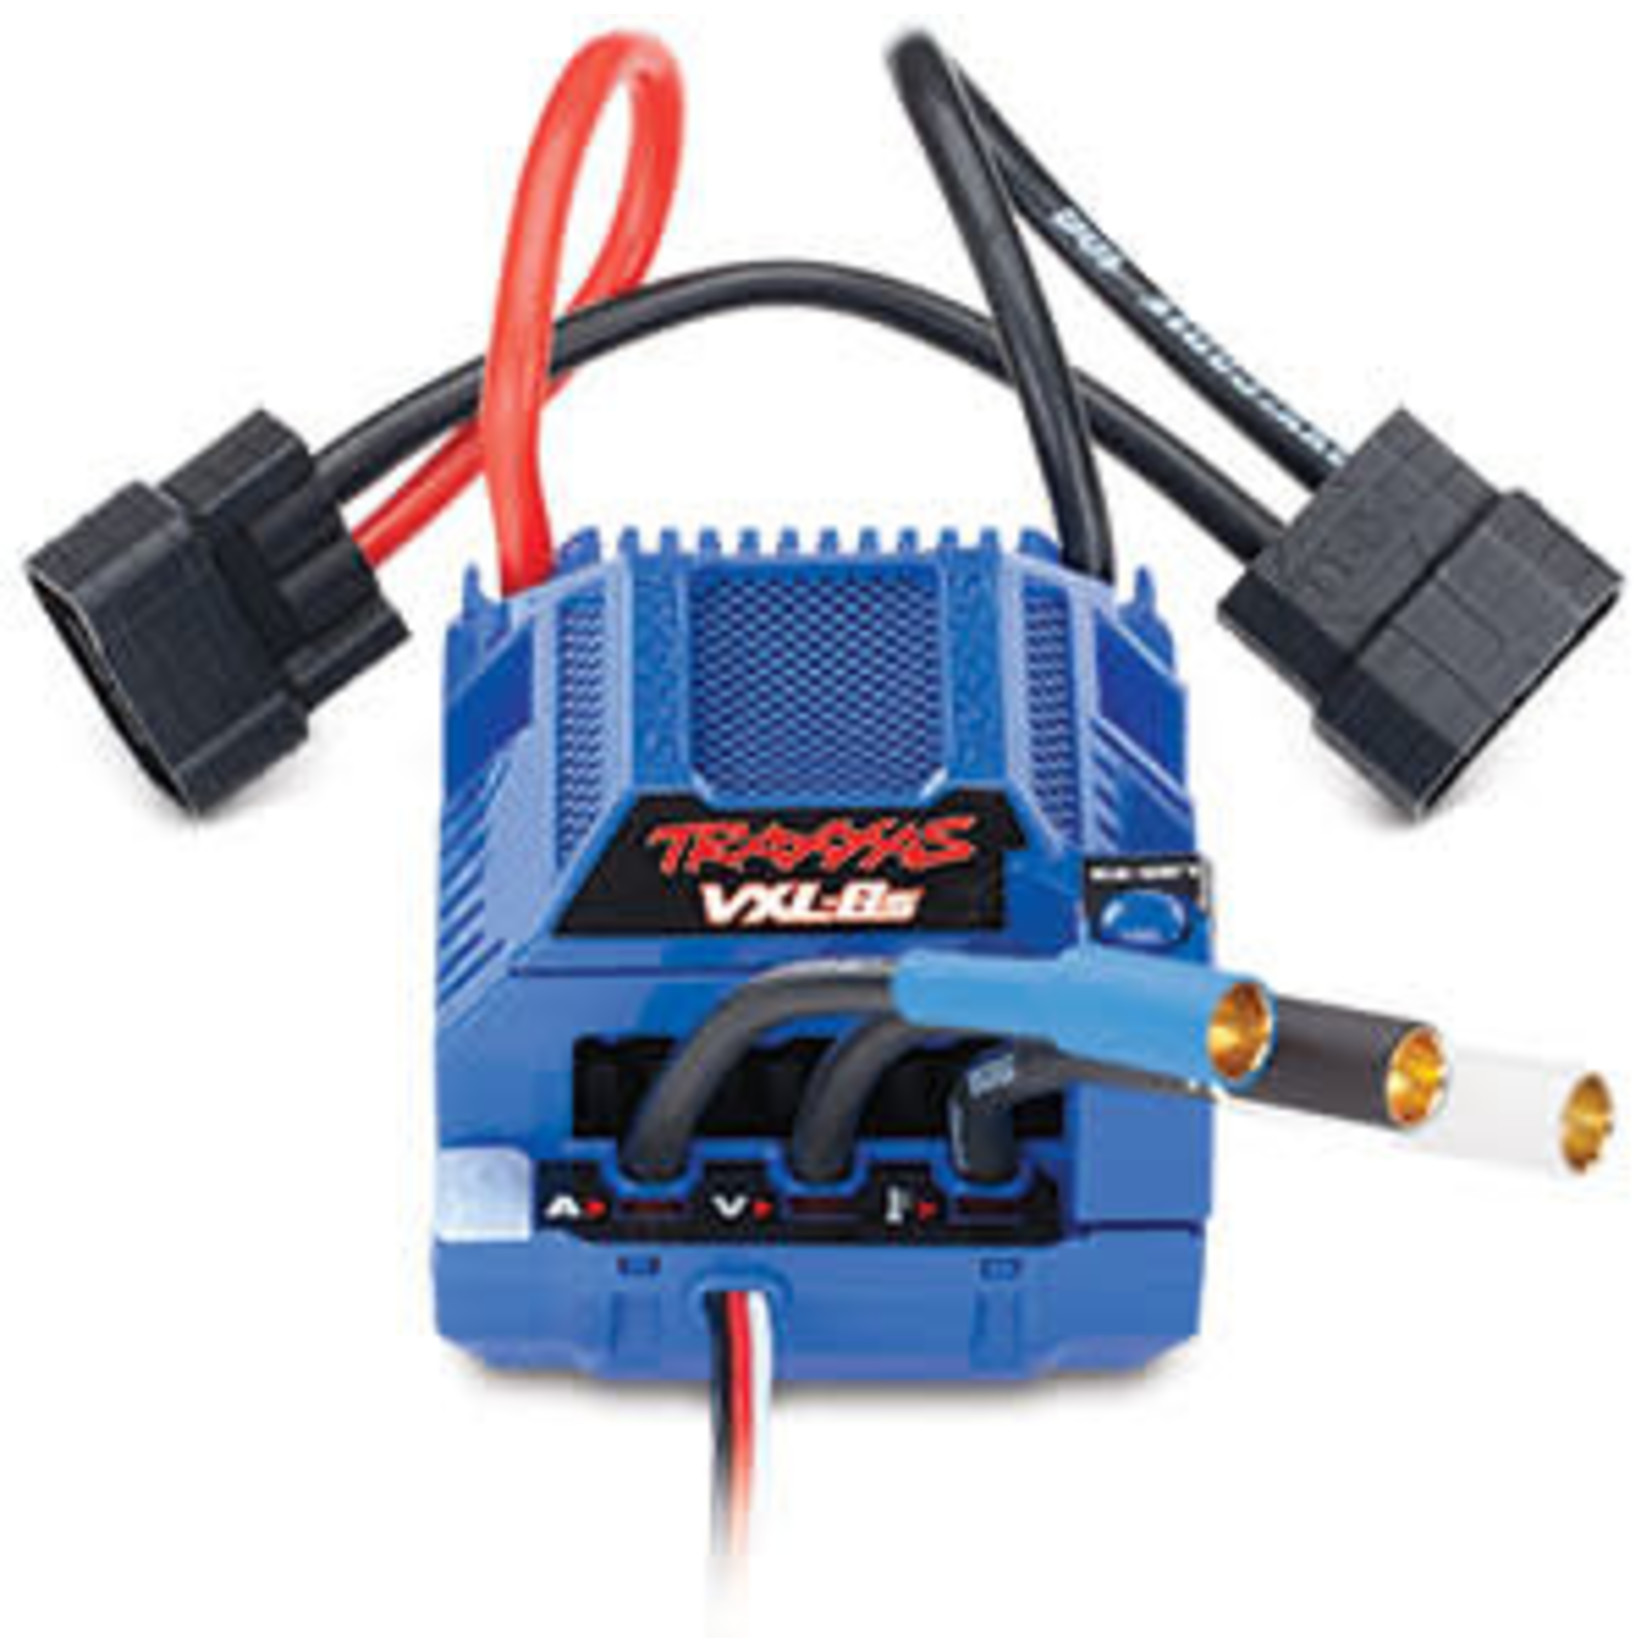 VXL-8s Electronic Speed Control, waterproof (brushless) - Get A Hobby